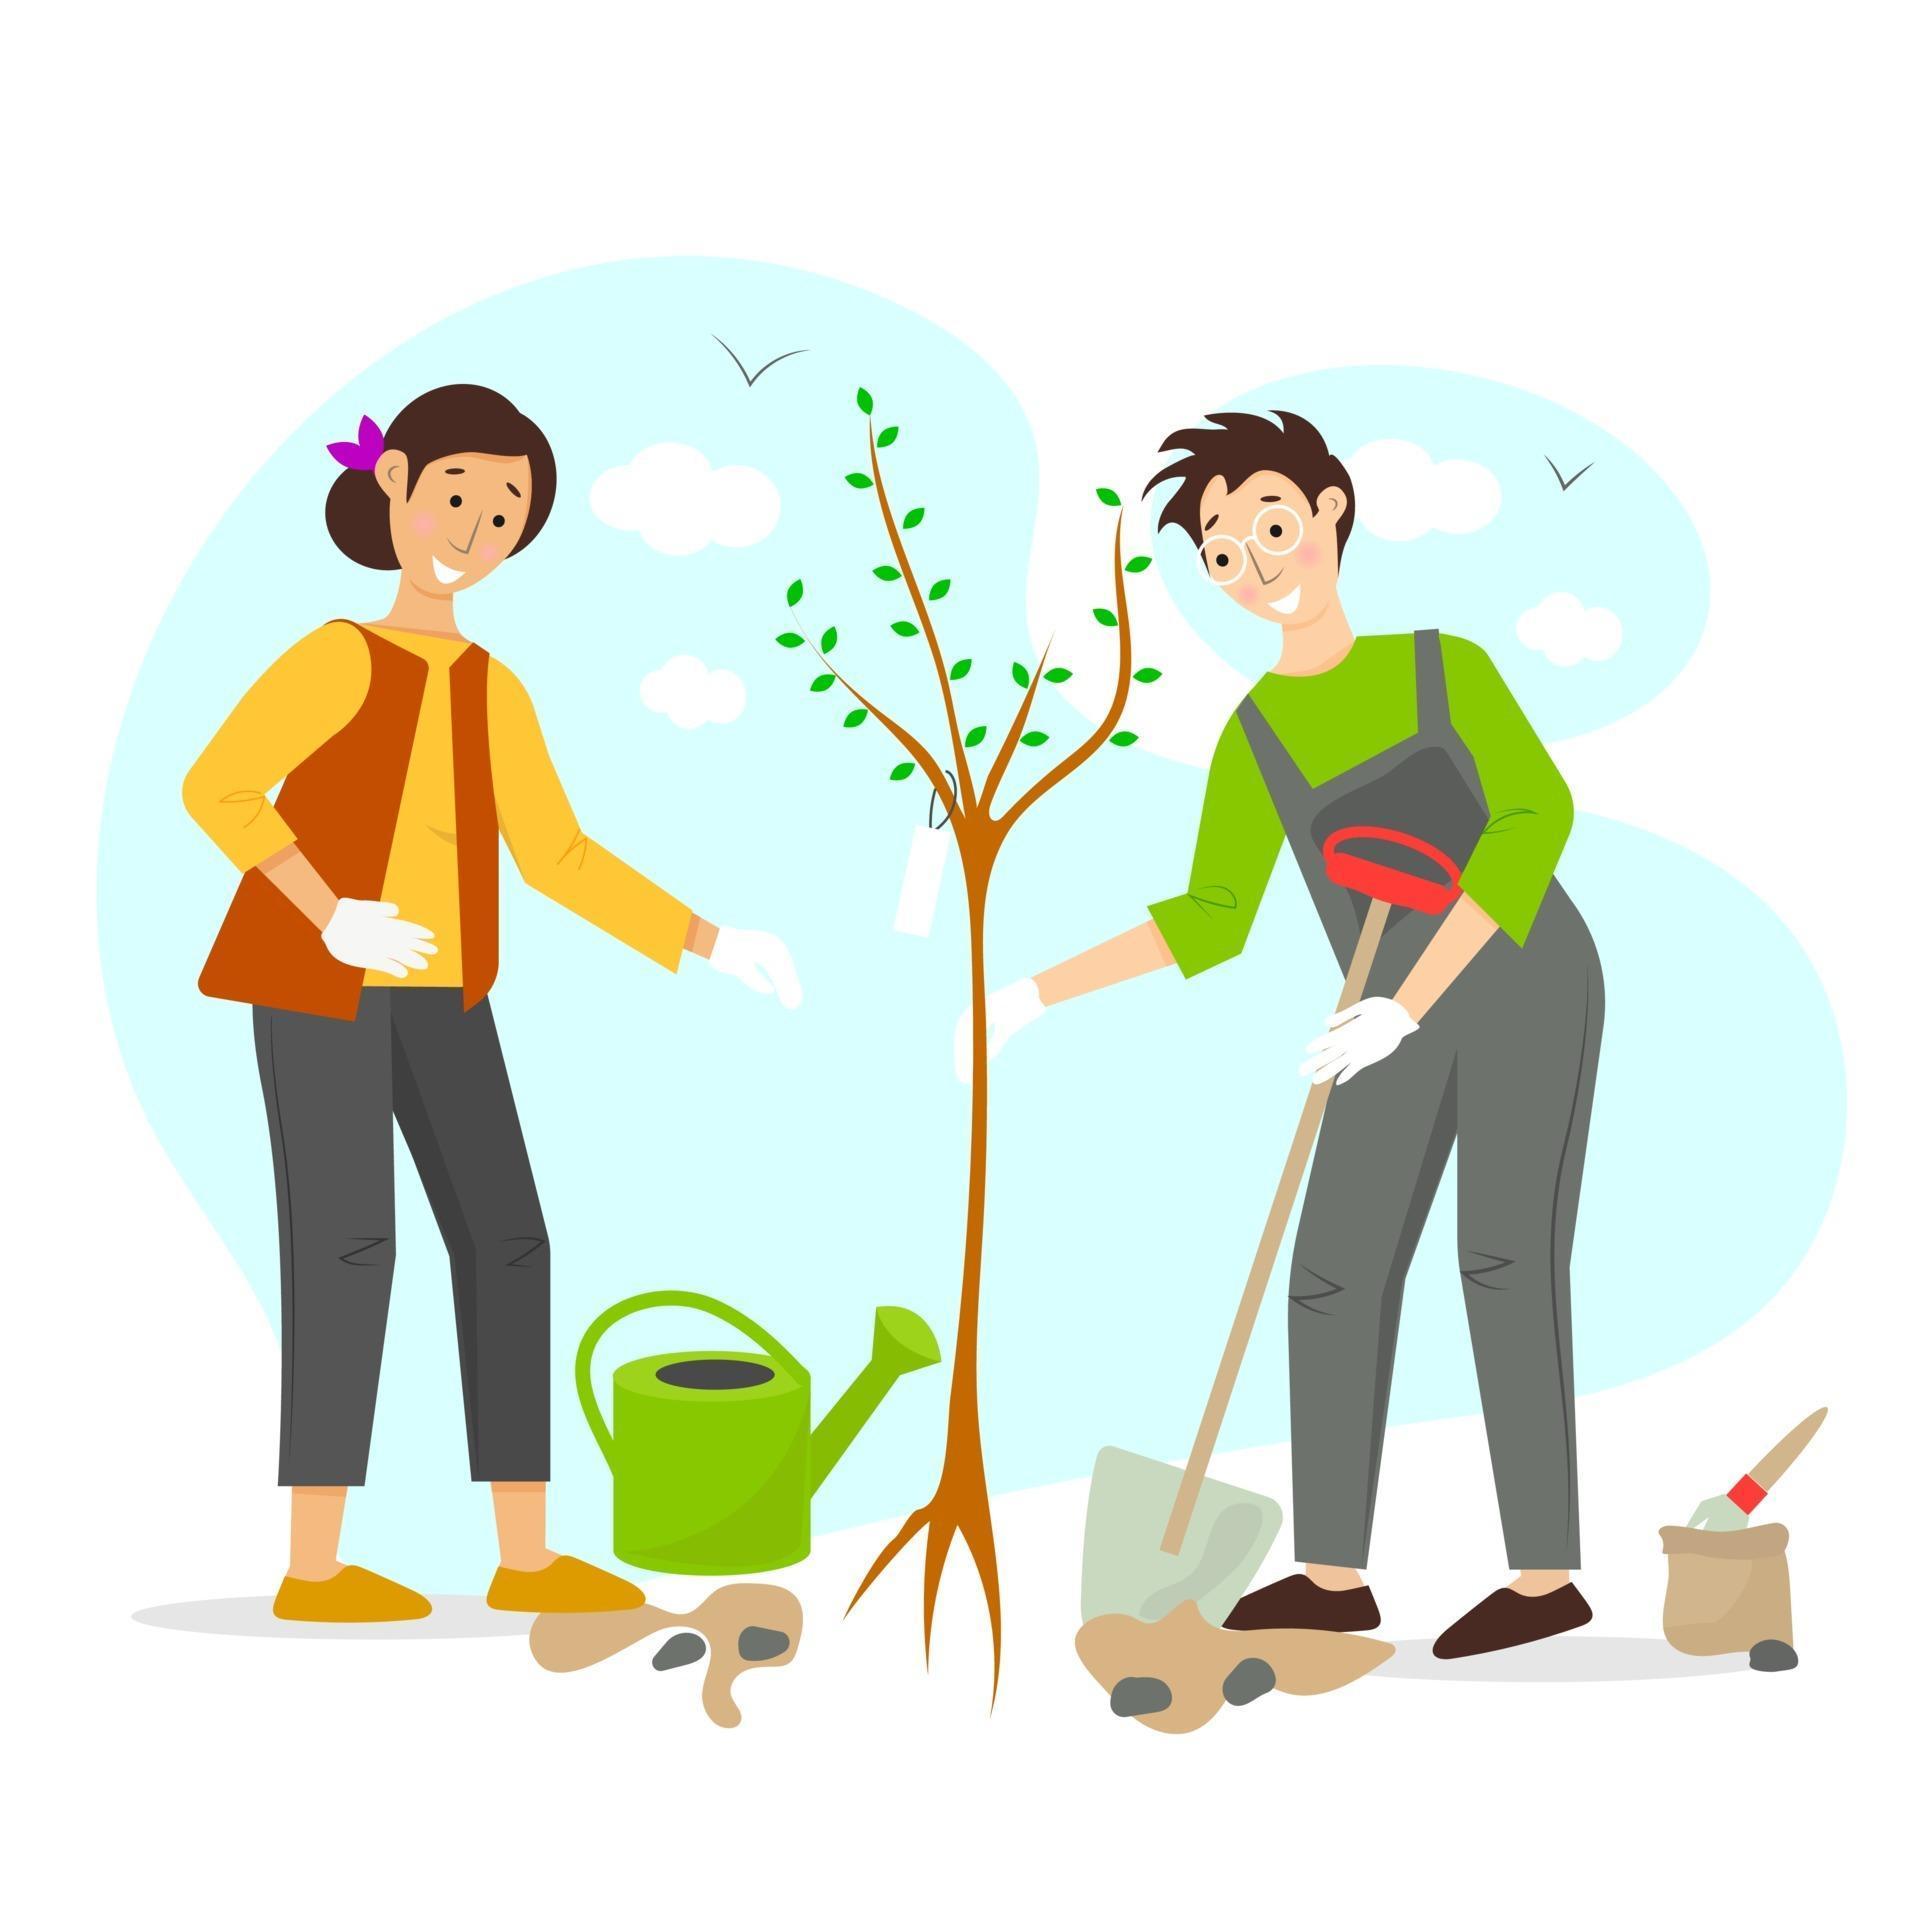 Gardening Vector Concept Illustration With Man And Women Planting A